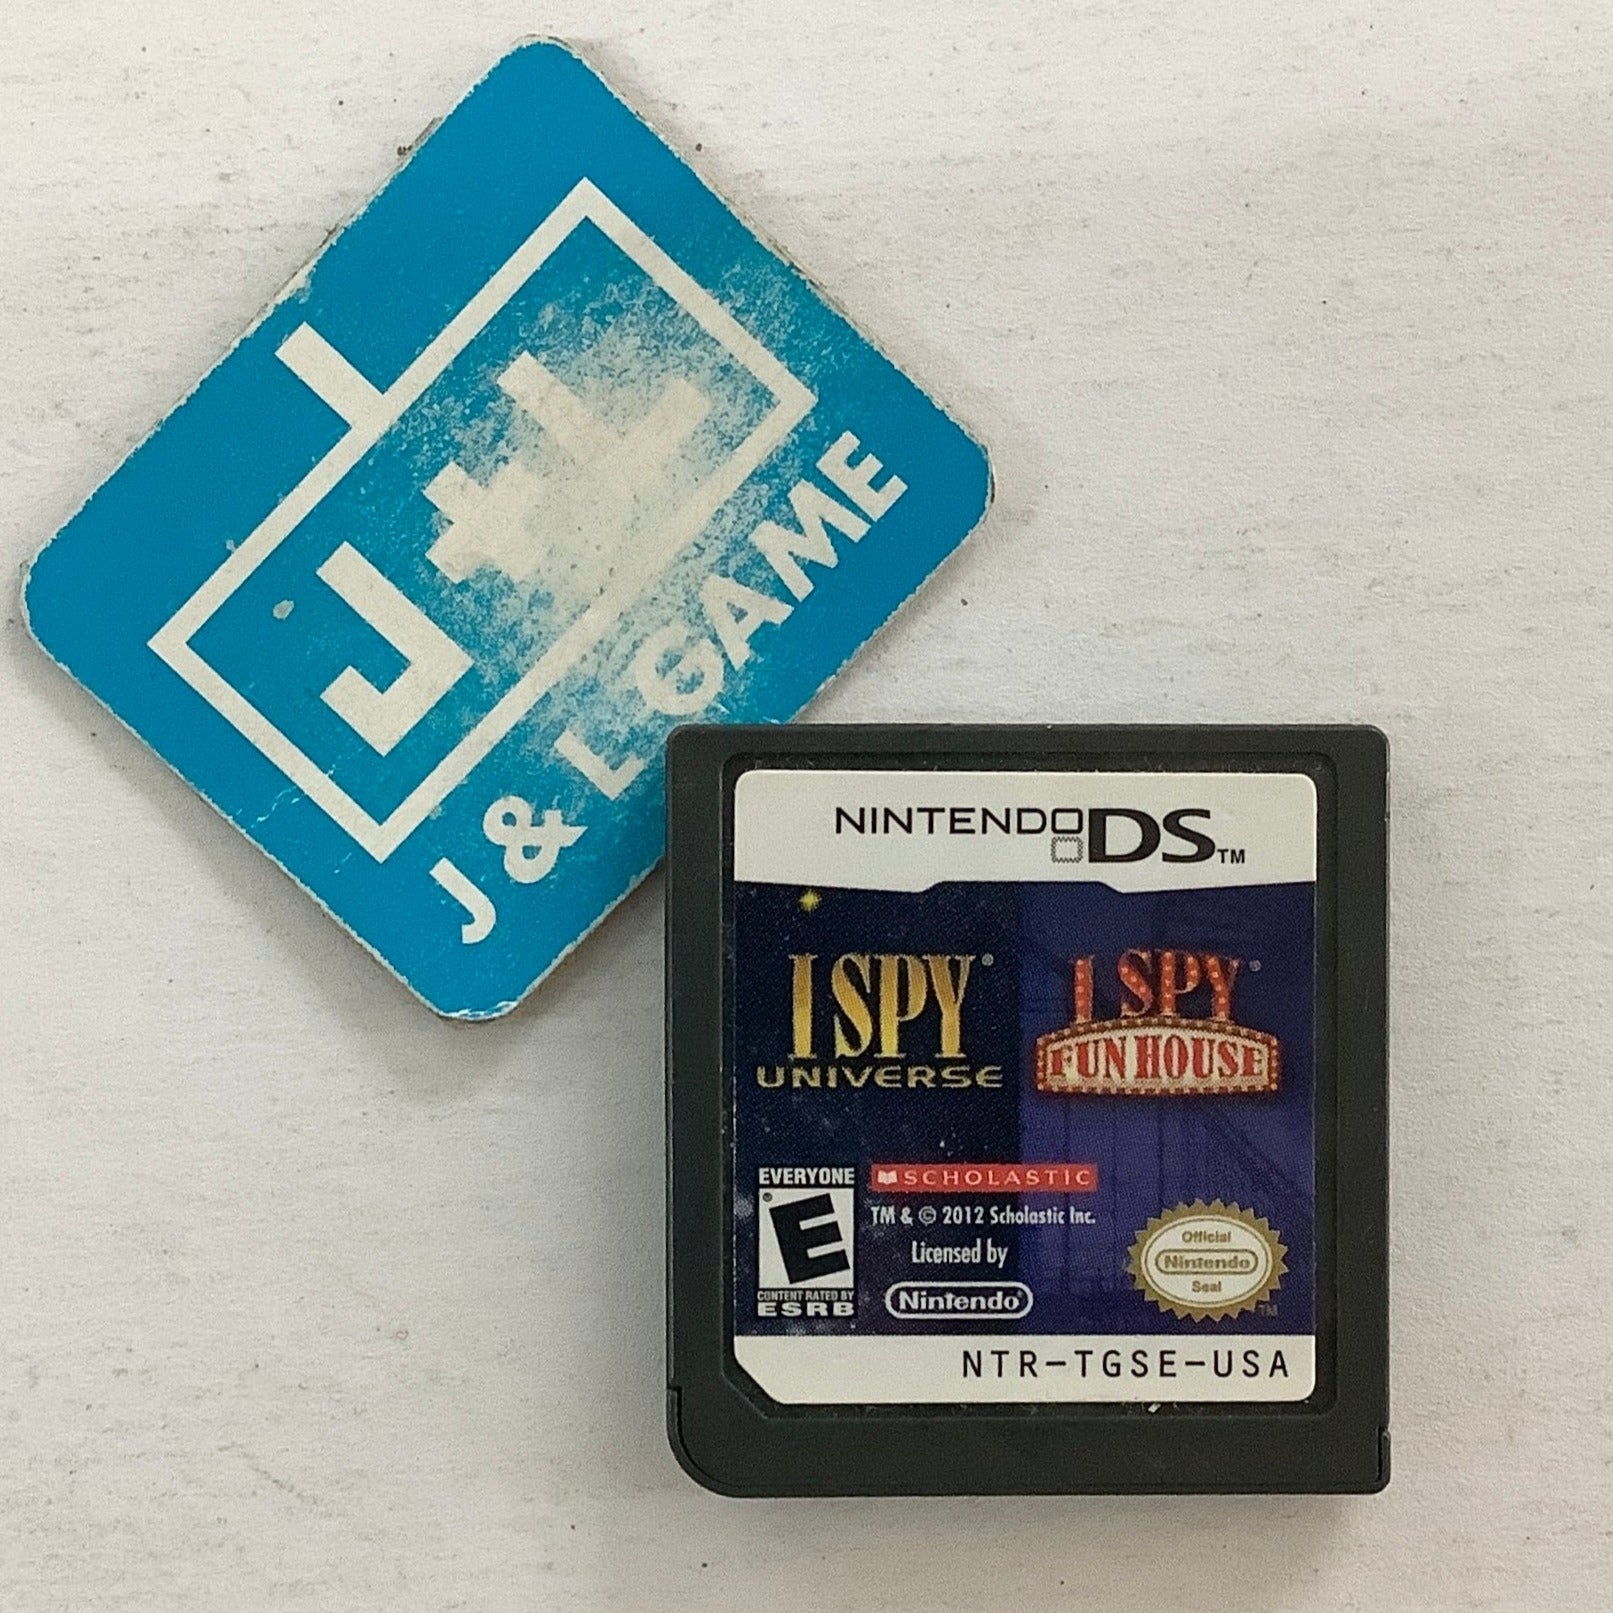 I Spy: Game Pack - I Spy Universe / I Spy Fun House - (NDS) Nintendo DS [Pre-Owned] Video Games Scholastic Inc.   